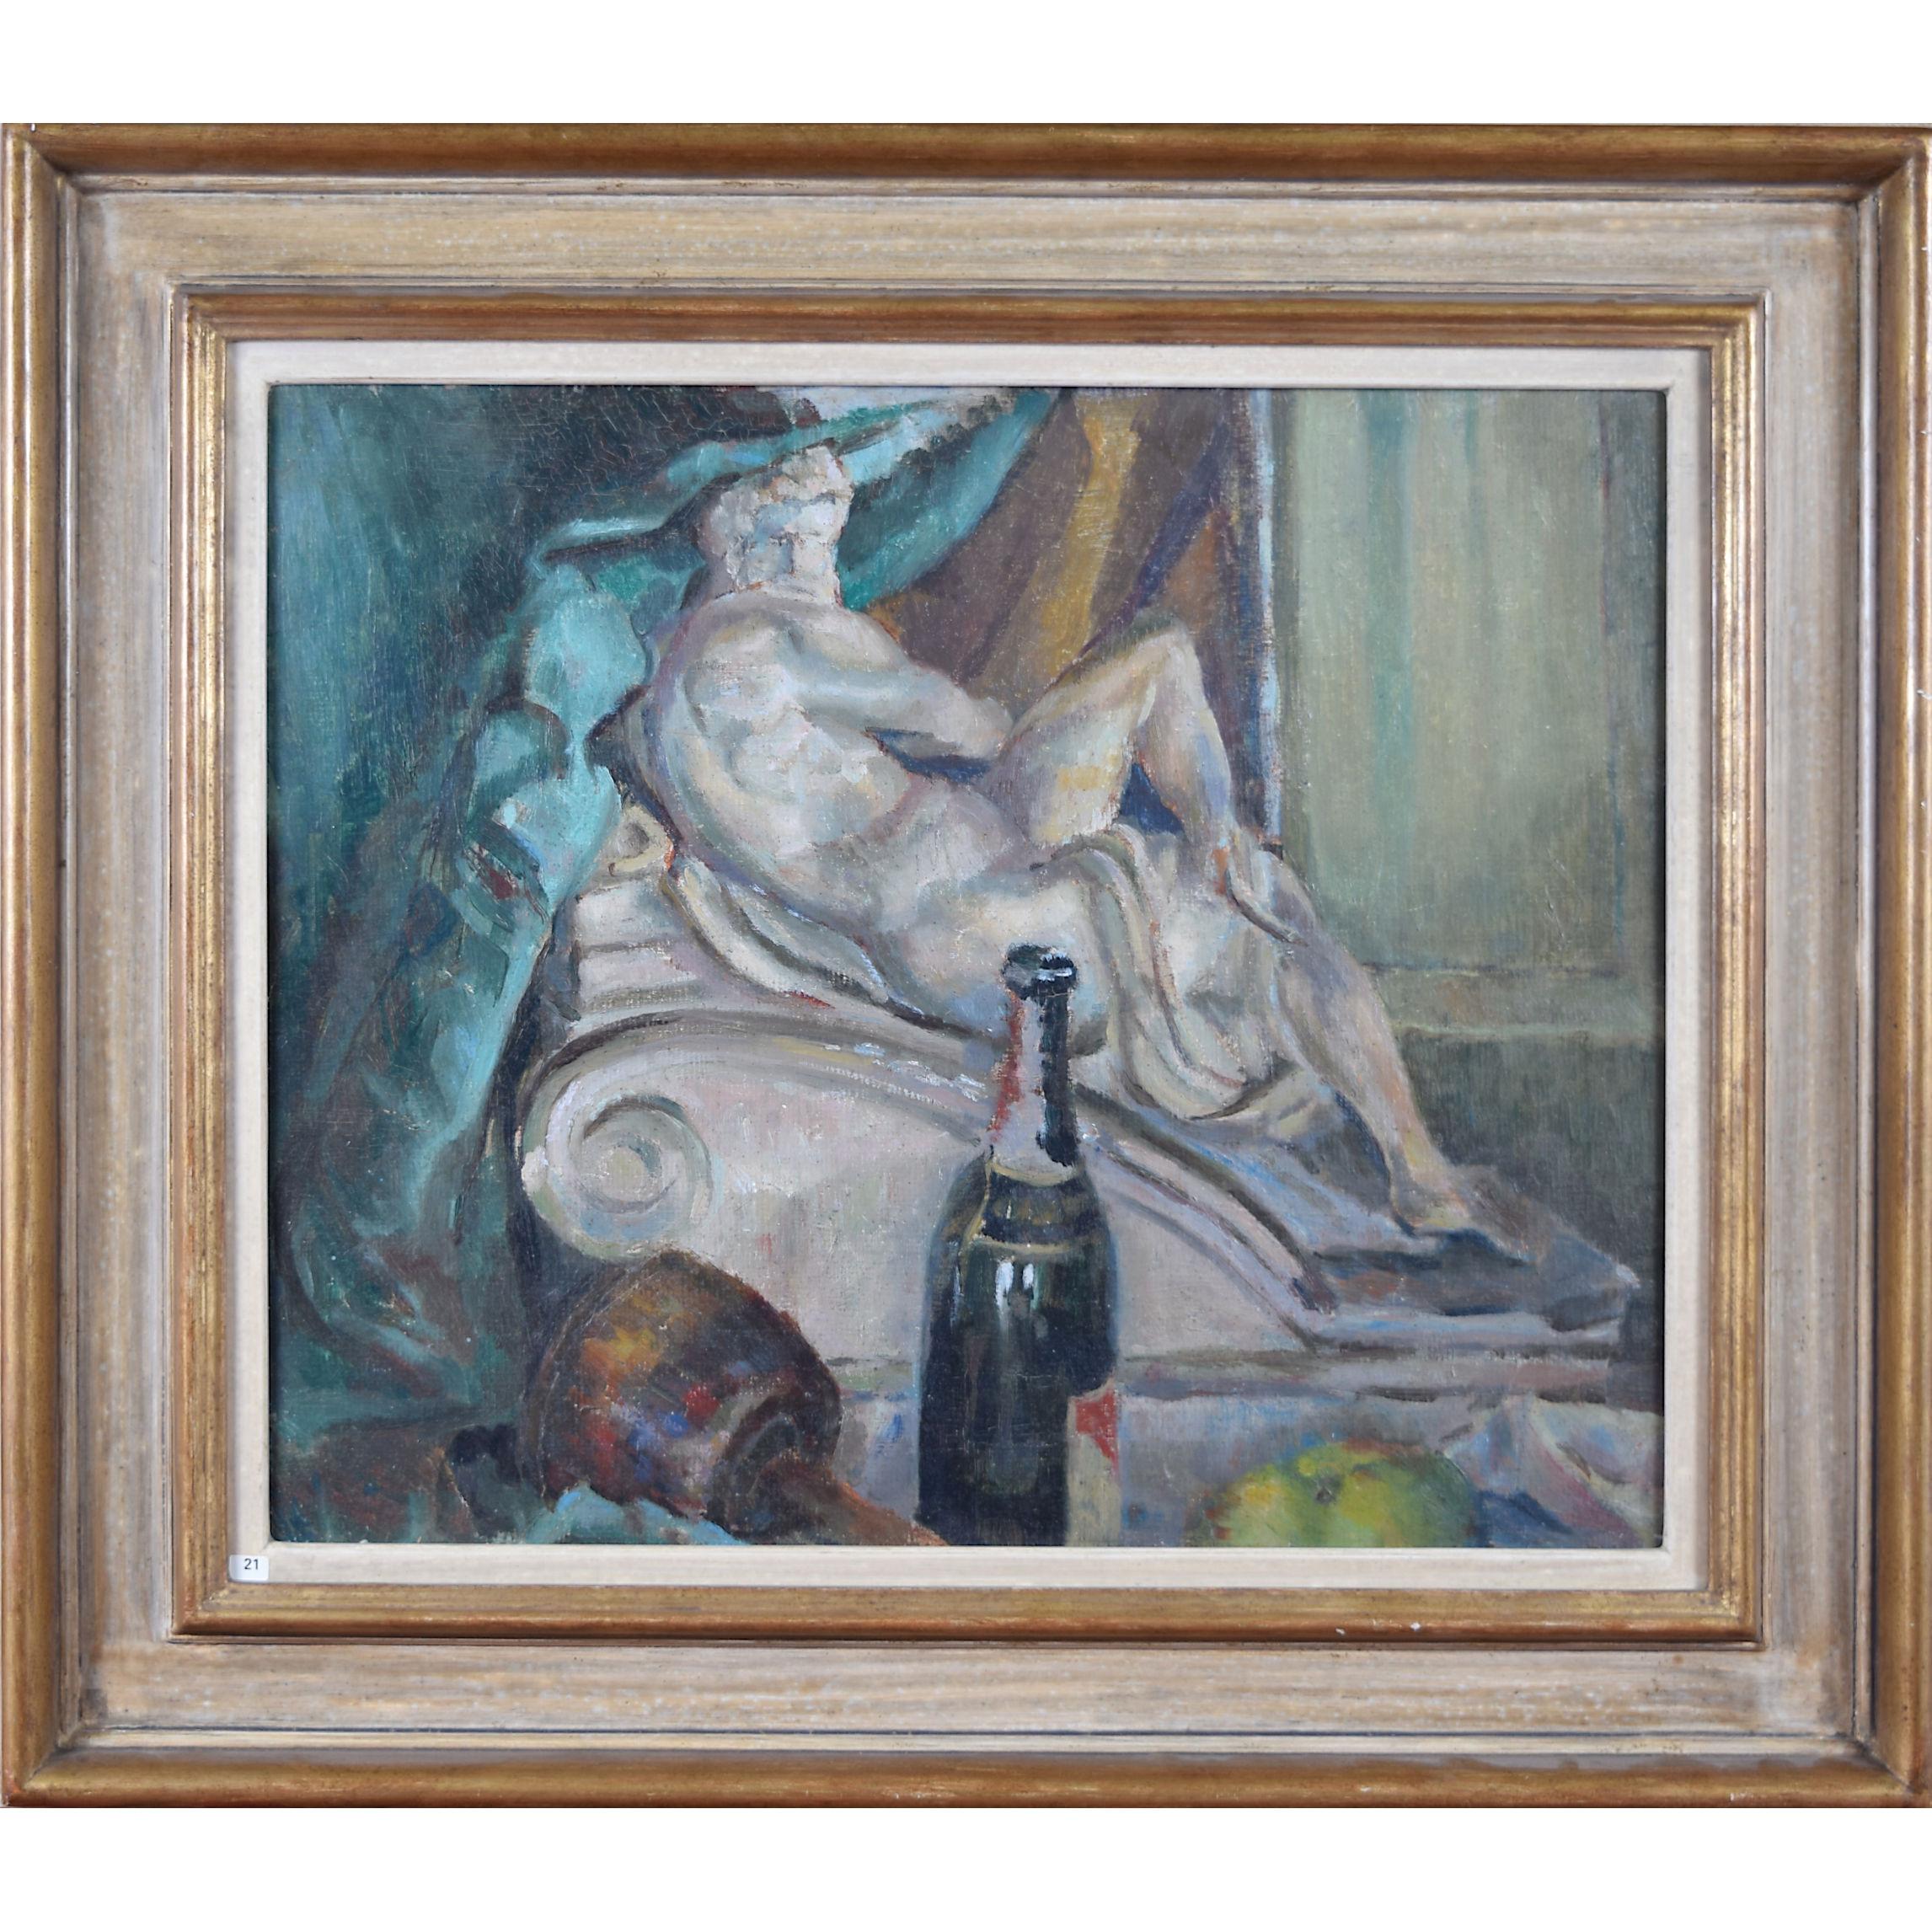 Terry Frost 'Bottle and Statue' oil painting abstract still life interior - Painting by Sir Terry Frost